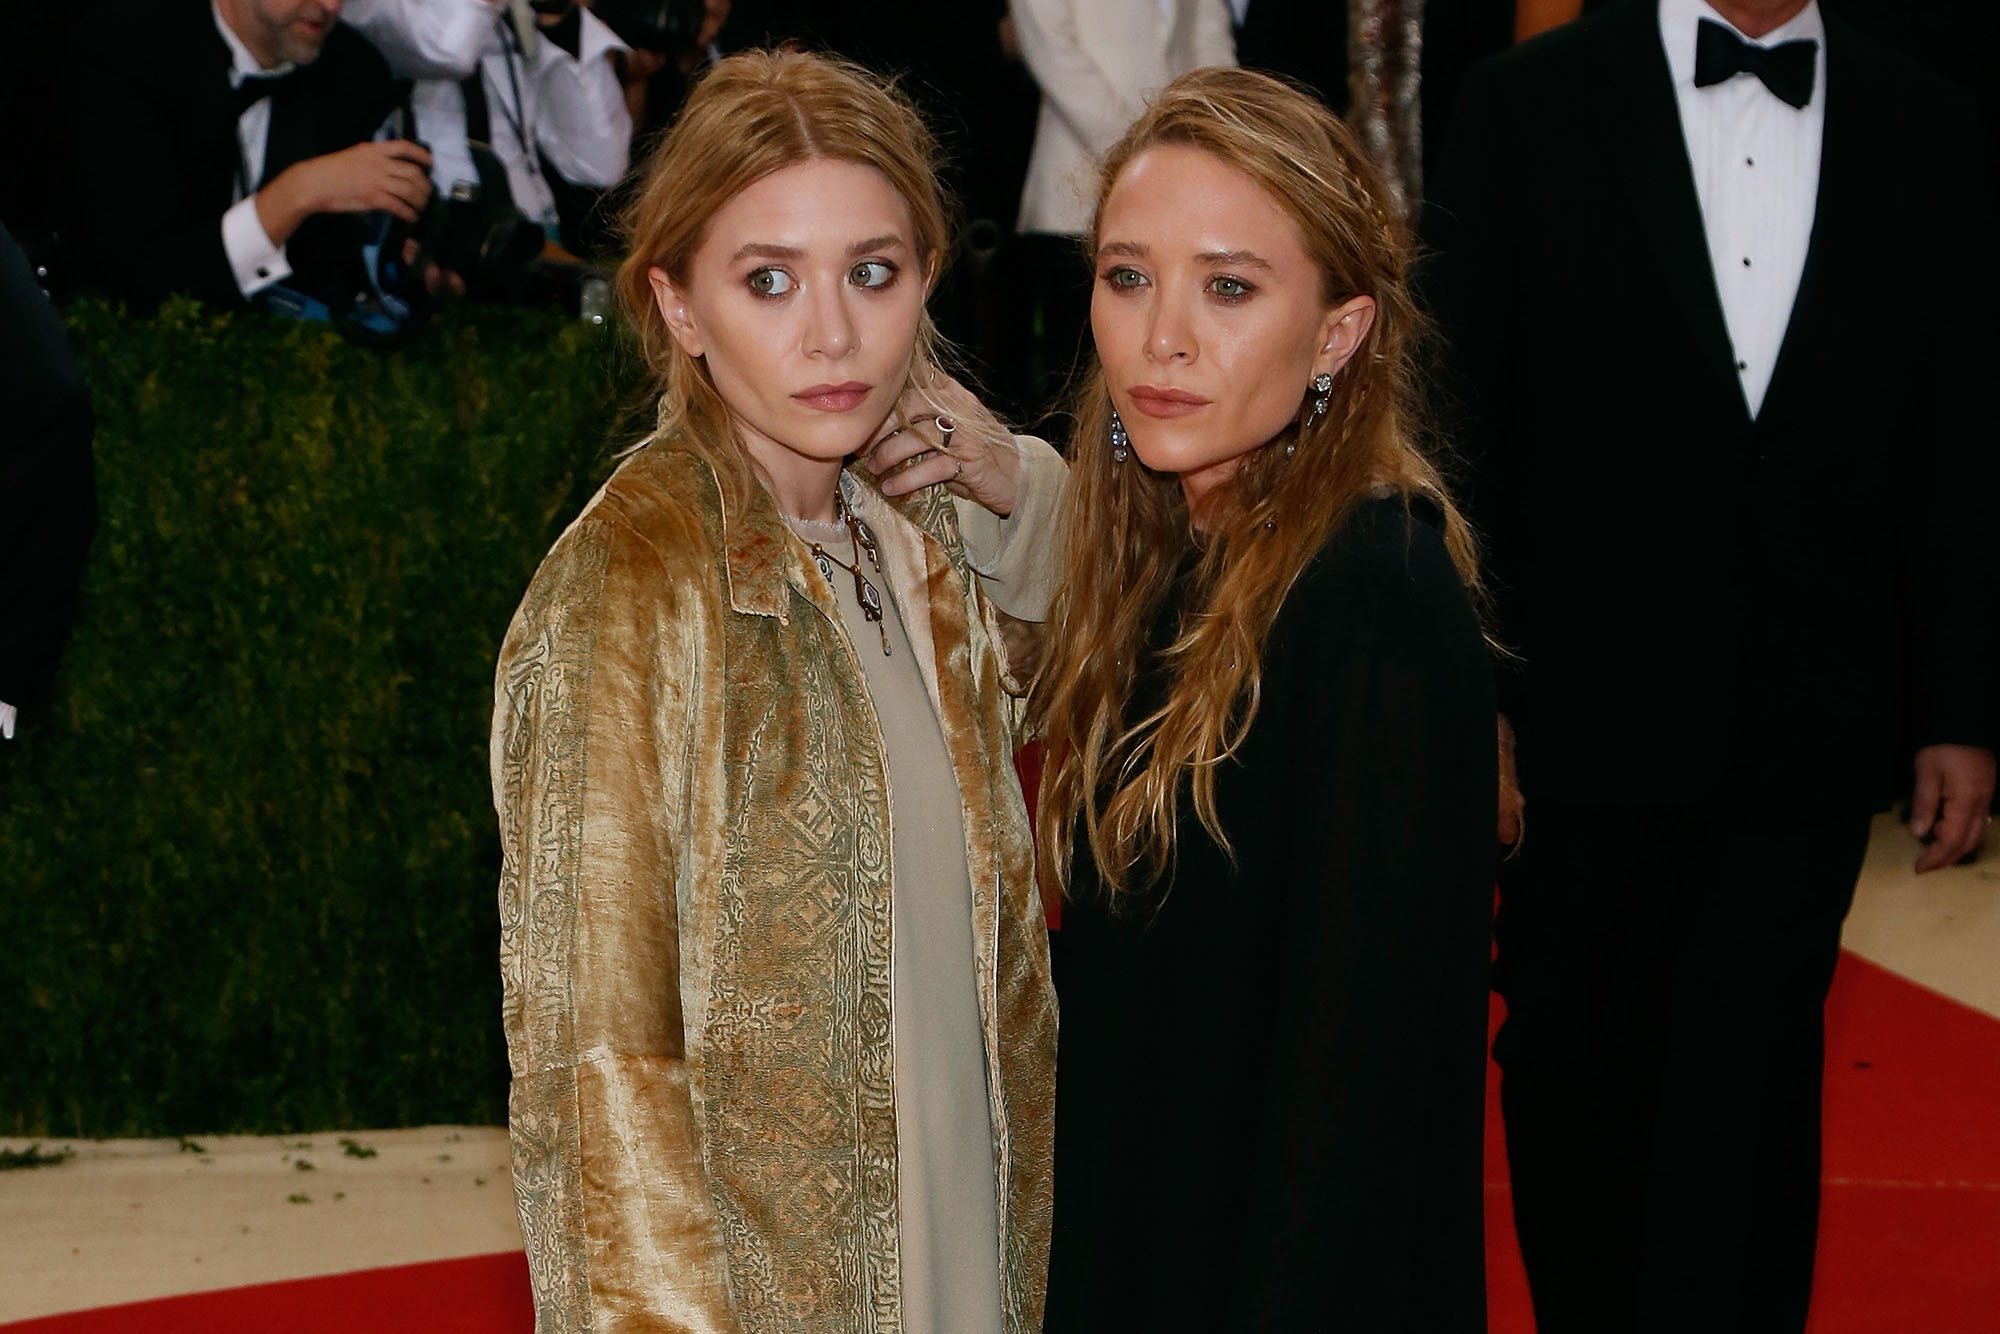 Mary-Kate and Ashley Olsen attend "Manus x Machina: Fashion in an Age of Technology", the 2016 Costume Institute Gala at the Metropolitan Museum of Art on May 02, 2016 in New York, New York.  (Photo by Taylor Hill/FilmMagic) (Taylor Hill&mdash;FilmMagic)